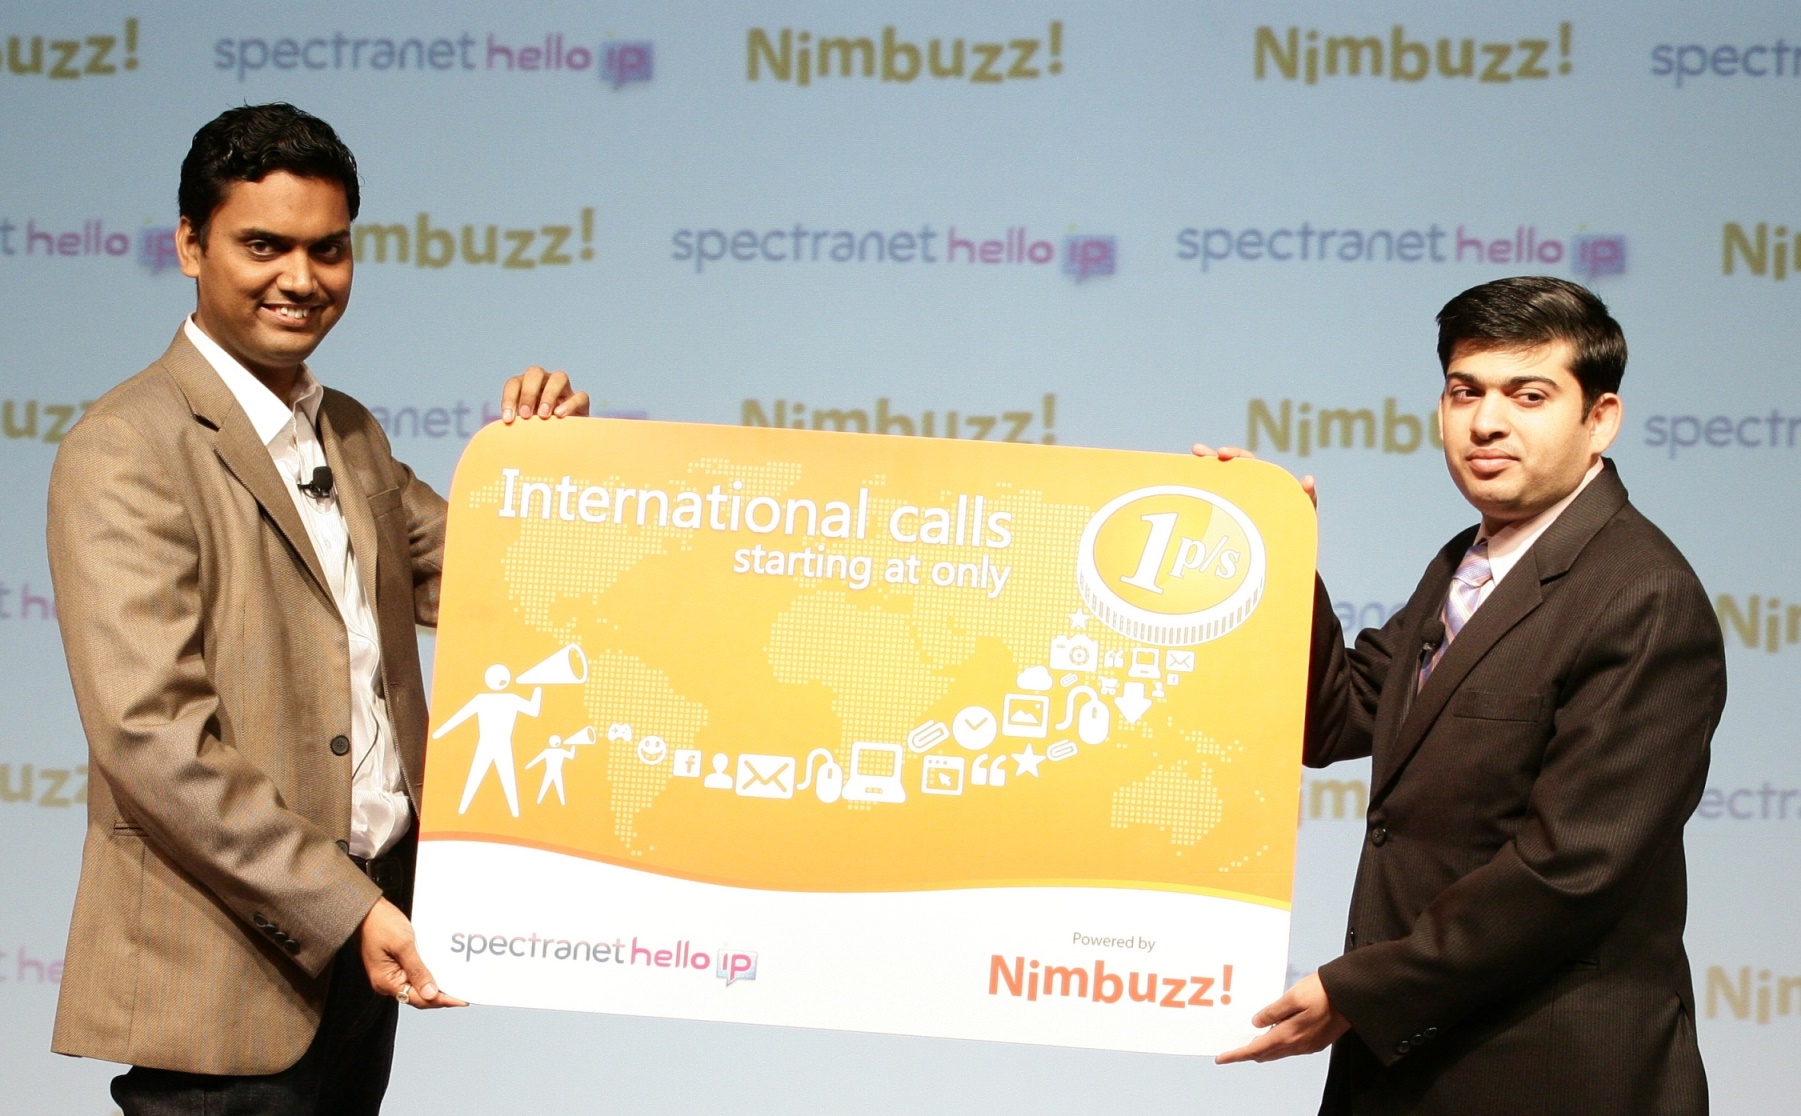 (L - R) - Vikas Saxena, CEO Nimbuzz and Udit Mehrotra, CEO, Spectranet launched Spectranet hello ip, India's first low-cost international calling platform, powered by Nimbuzz